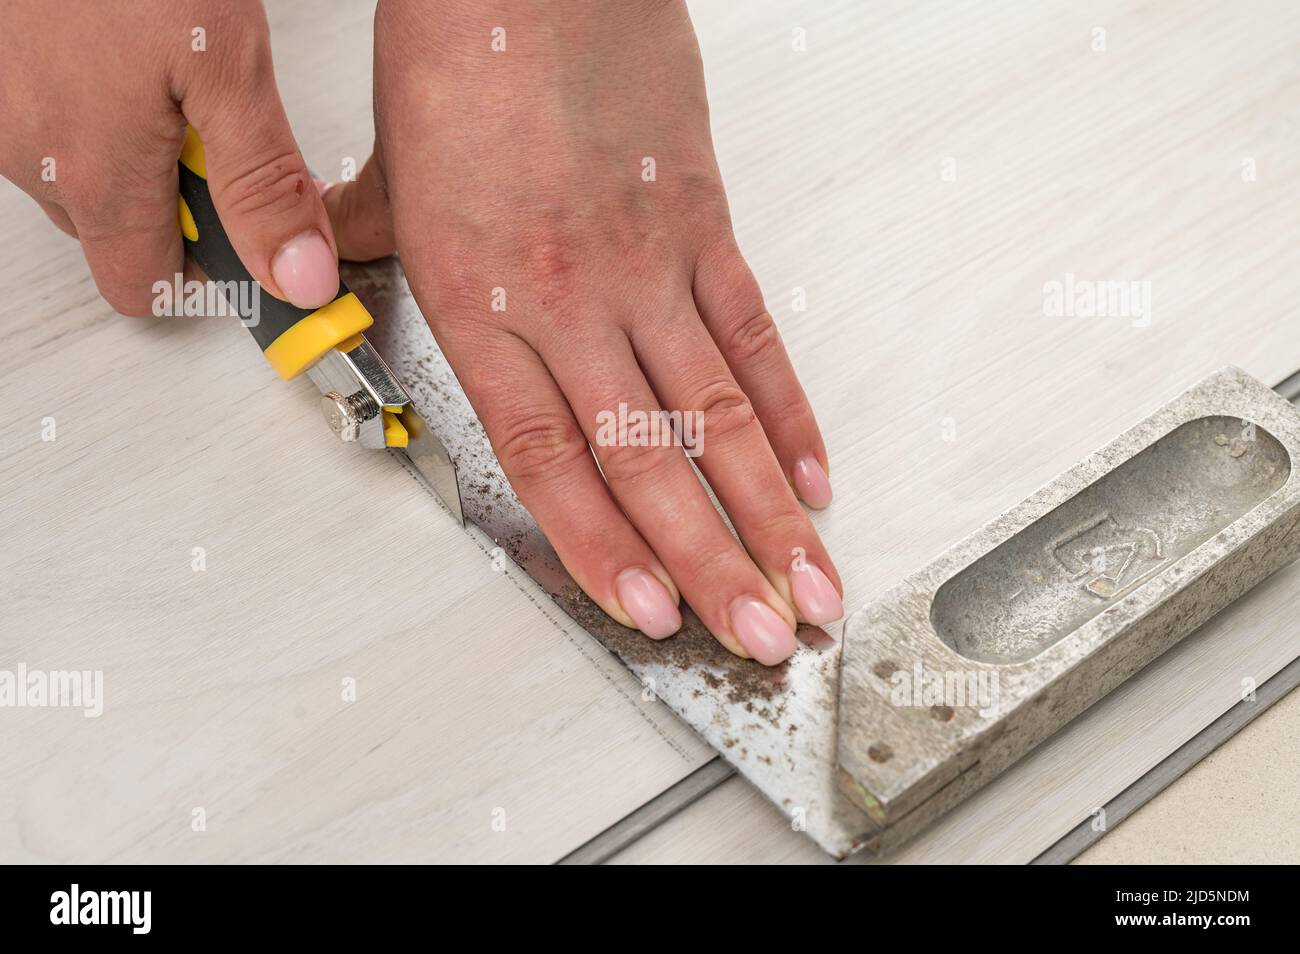 Female master cuts quartz vinyl floor with a stationery knife, floor installation, woman performs repair work. Stock Photo